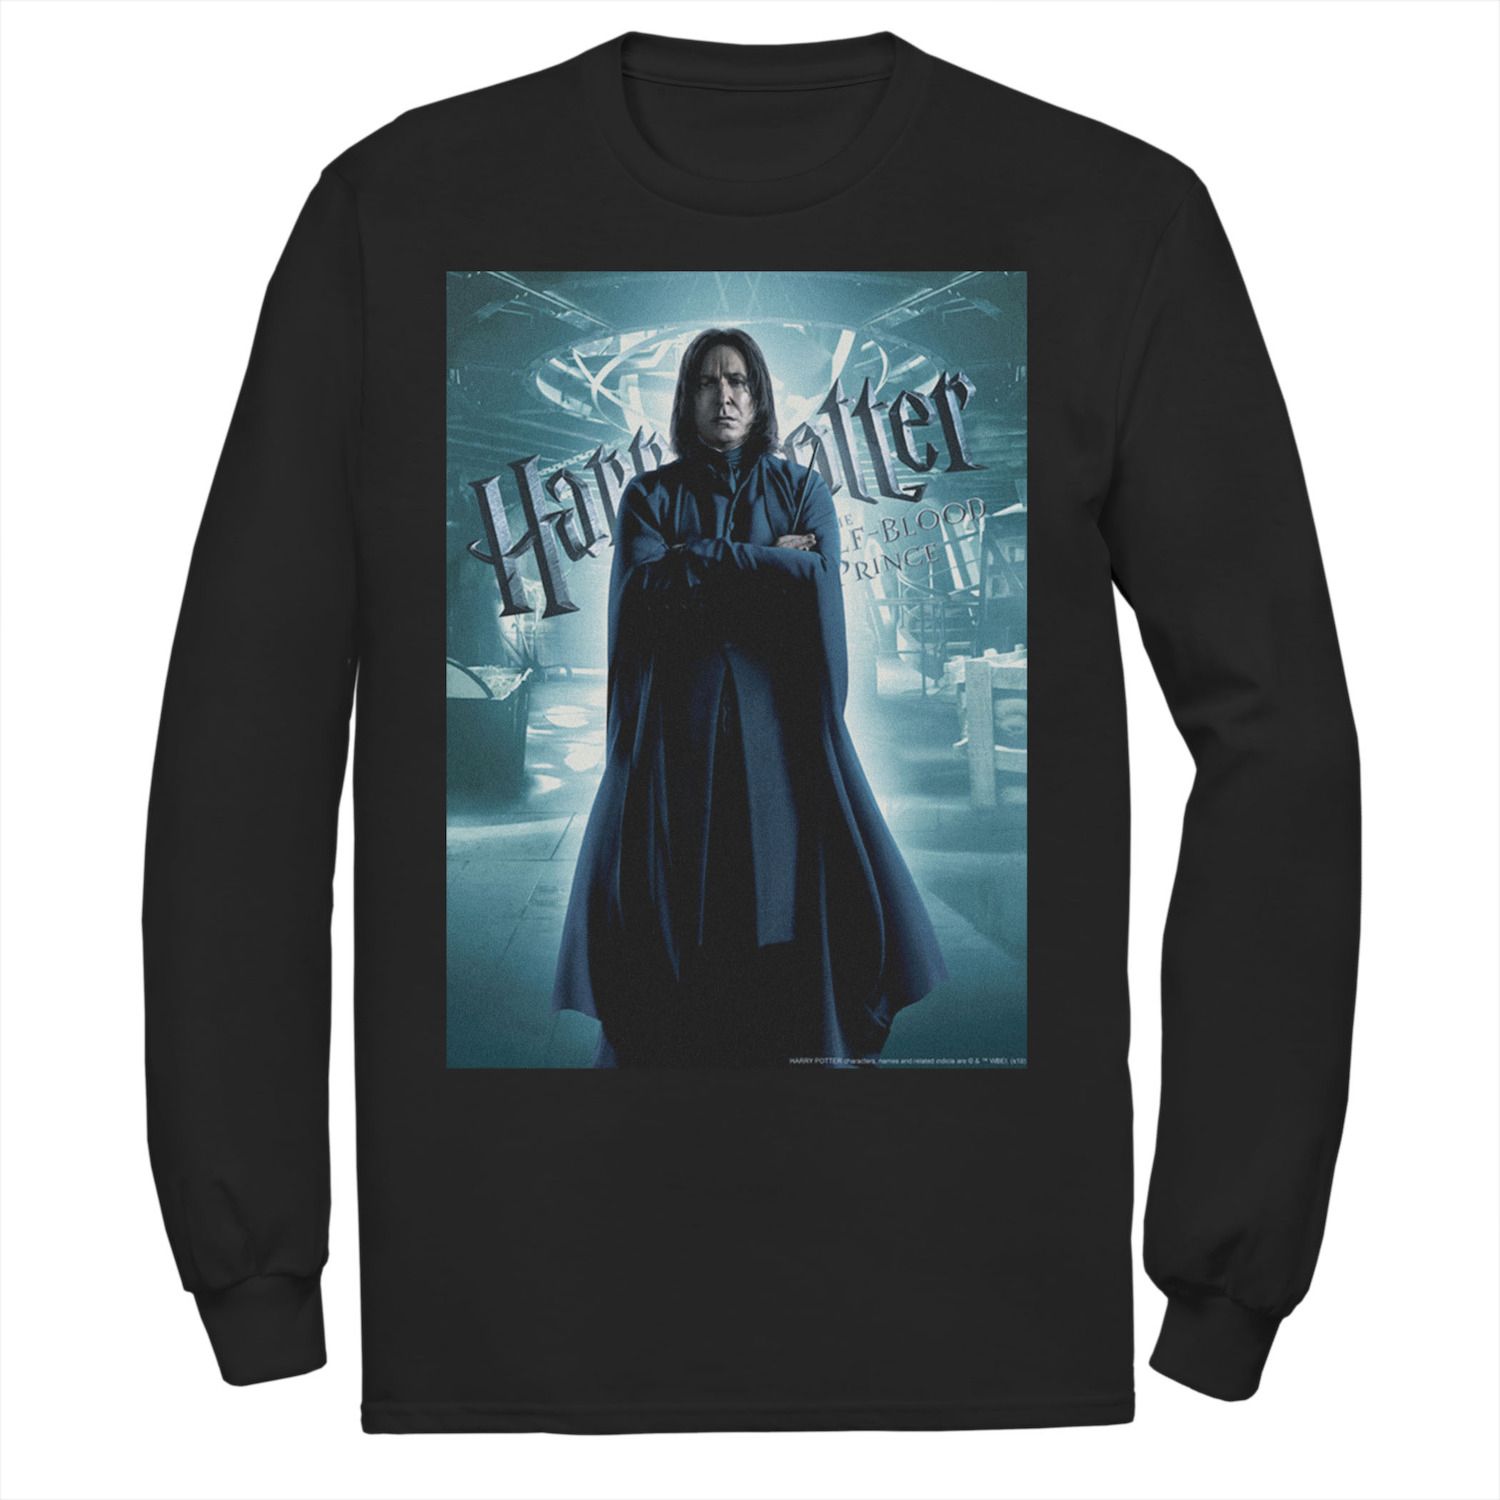 Image for Harry Potter Men's Half-Blood Prince Snape Character Poster Long Sleeve Graphic Tee at Kohl's.